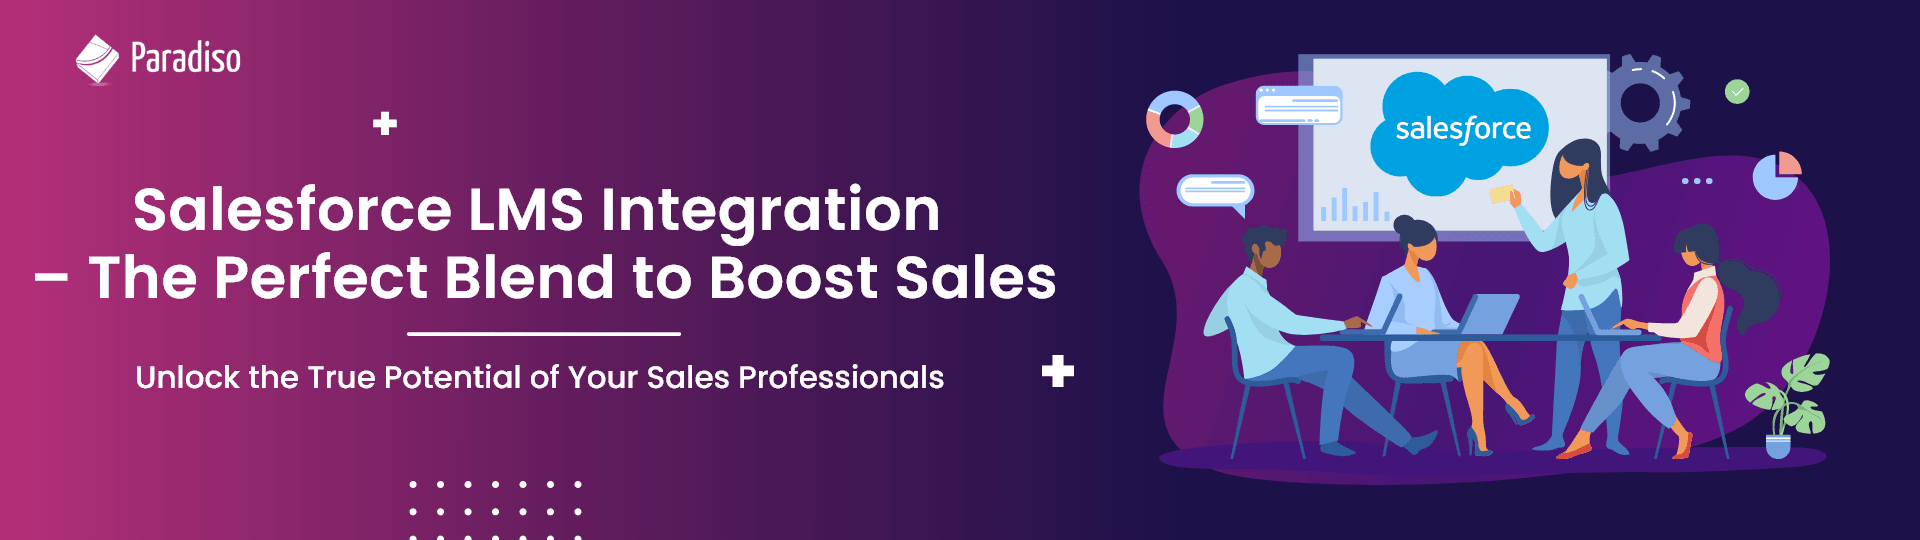 Salesforce LMS Integration is what you need to Amplify Your Sales and Improve Business